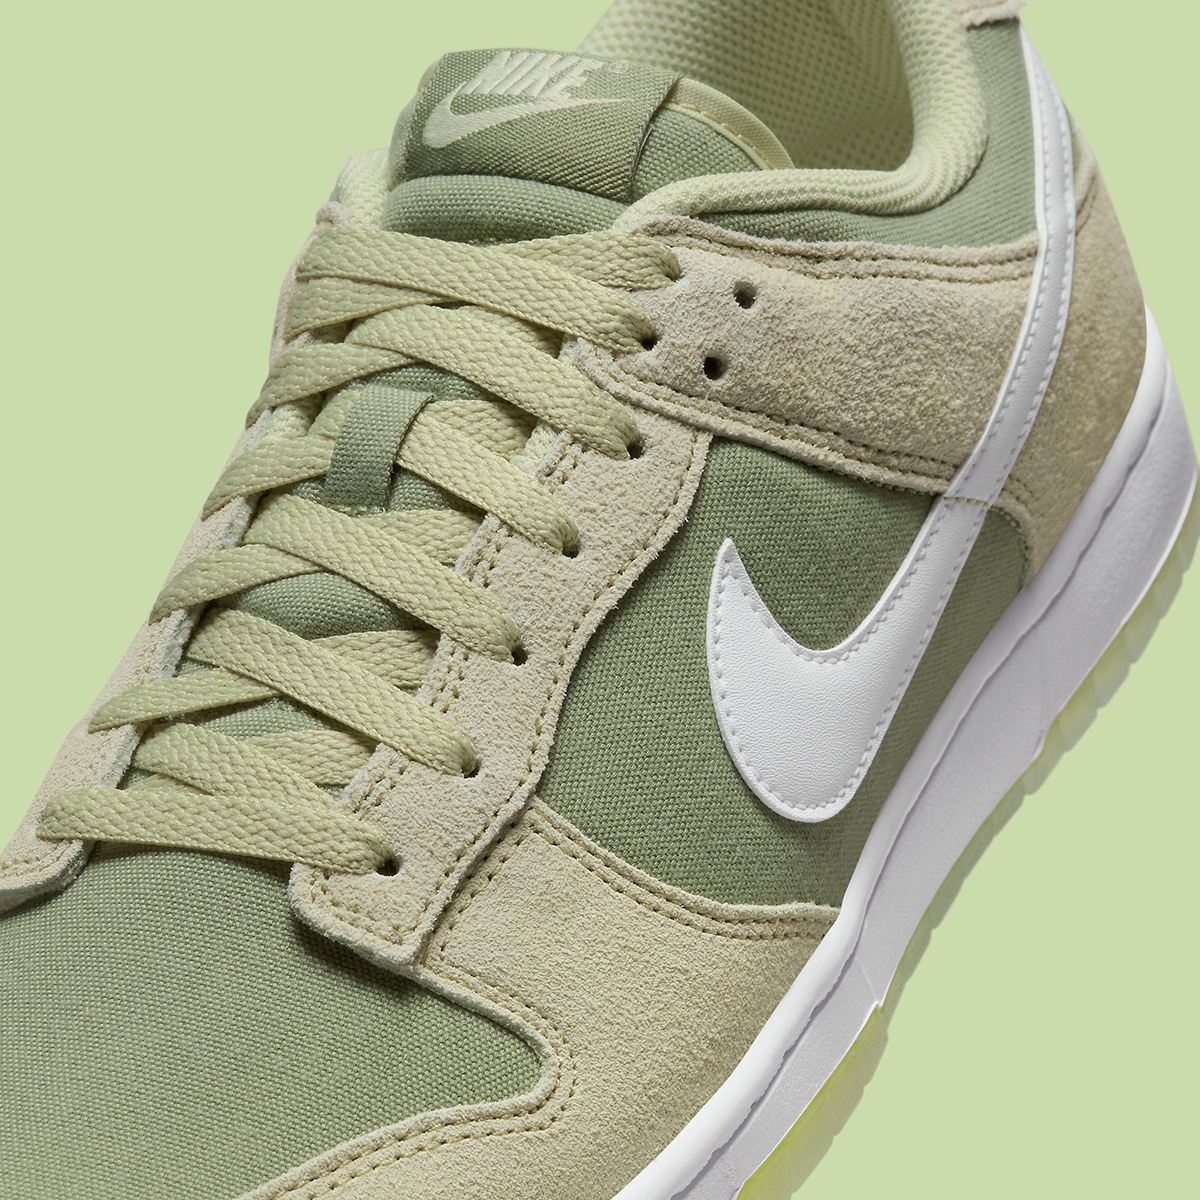 Nike Dunk Low Oil Green White Olive Aura Bright Cactus Hm9651 300 2